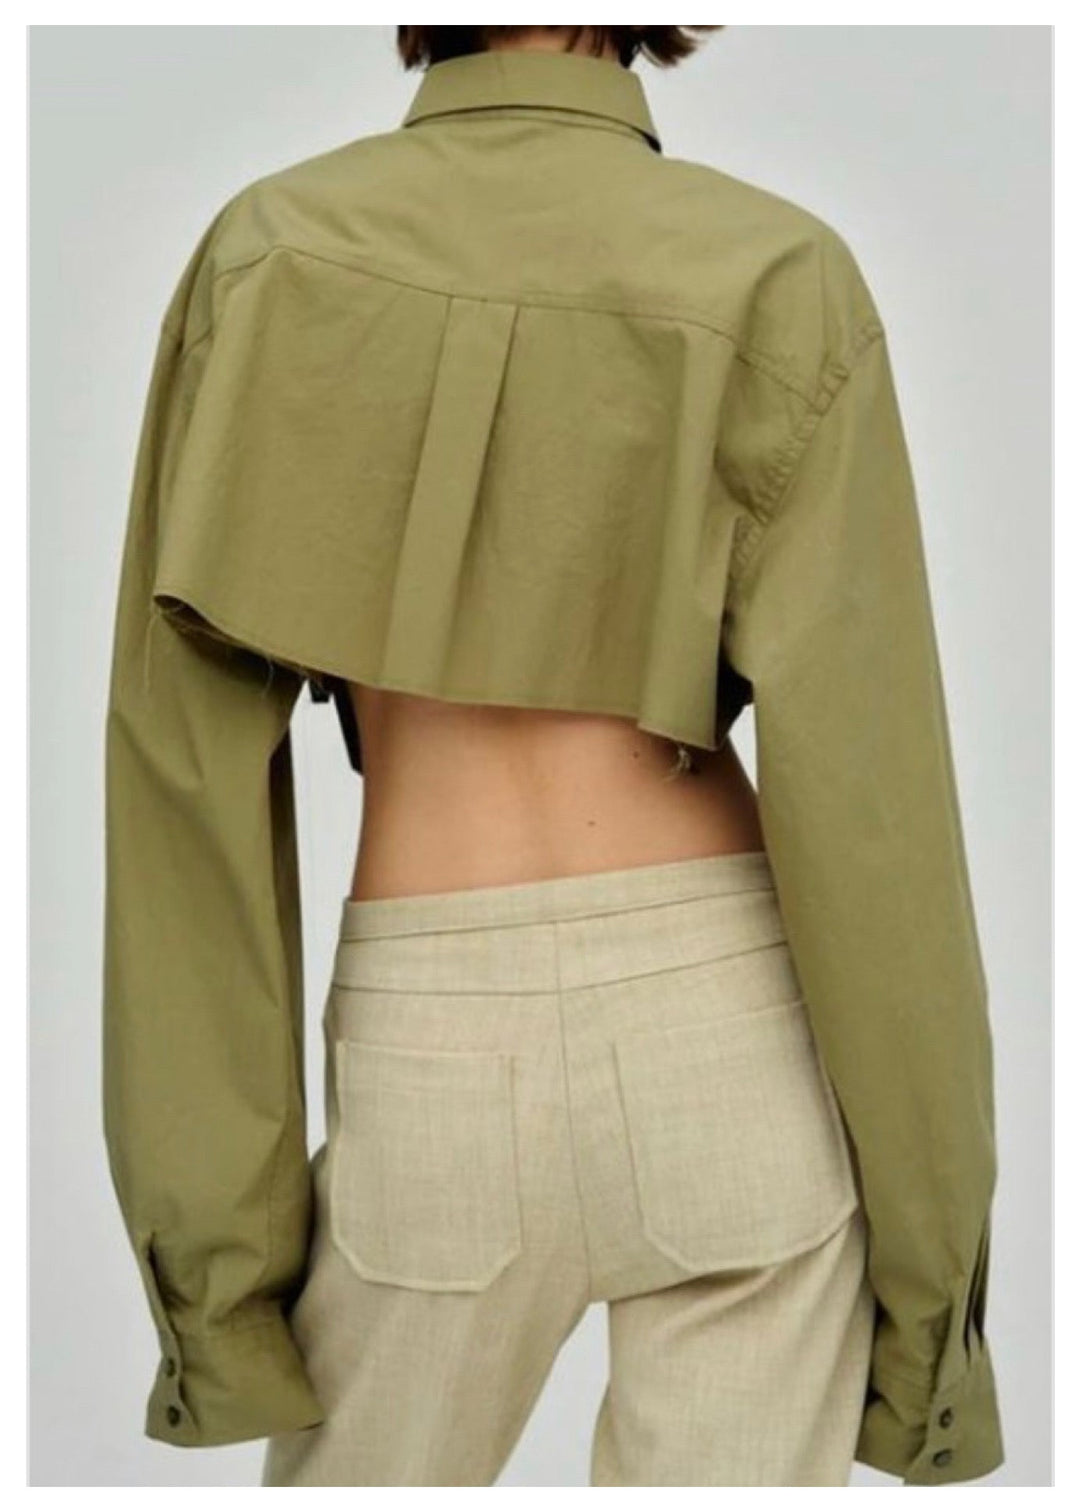 Maxed out Too Crop Long Sleeve Top (Olive)